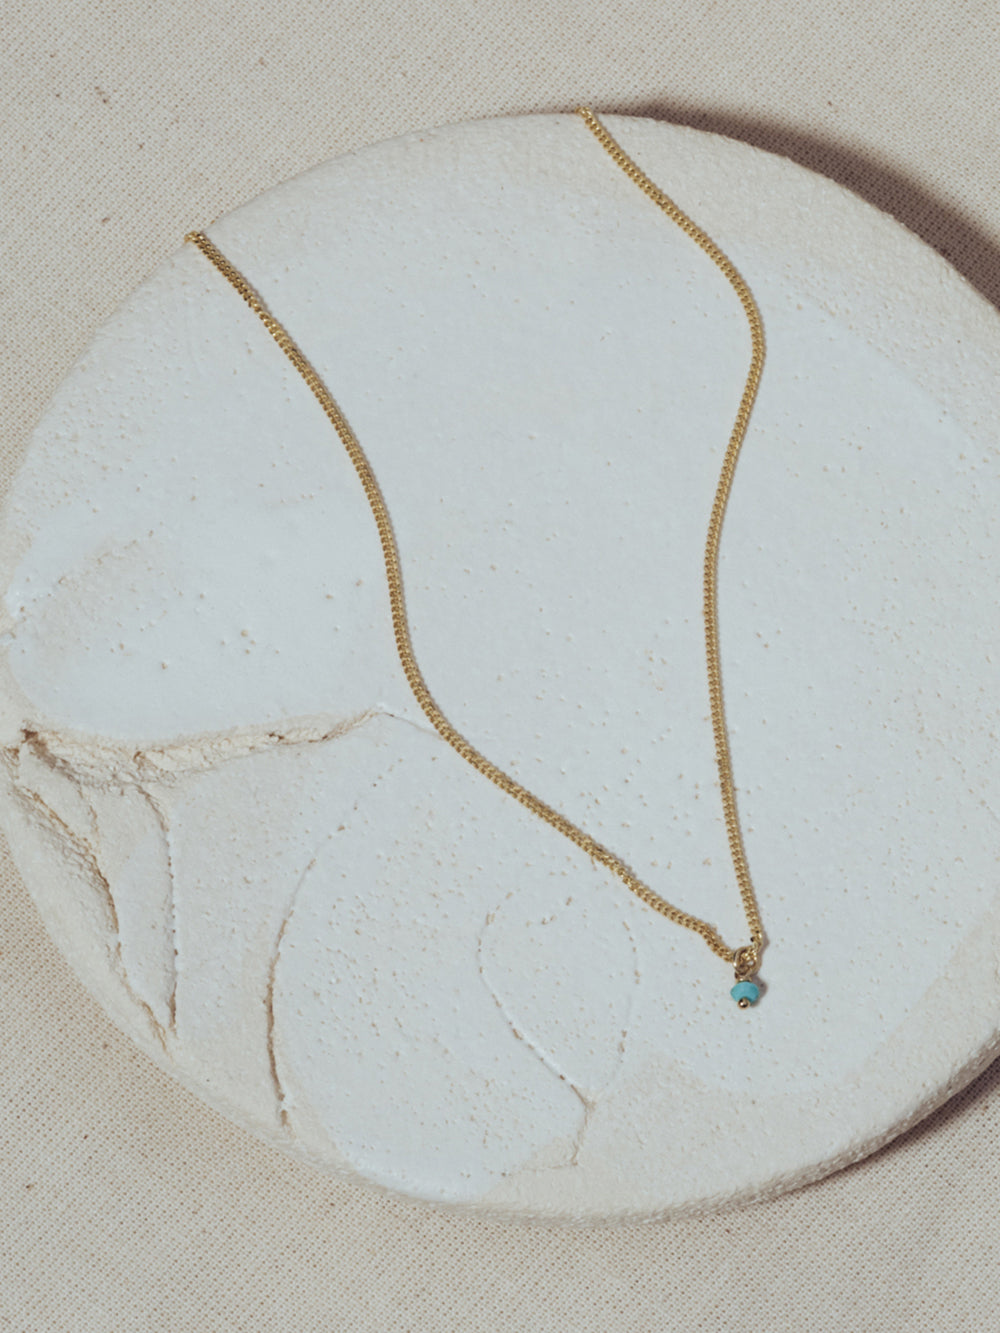 Birthstone December - Turquoise | 14K Solid Gold